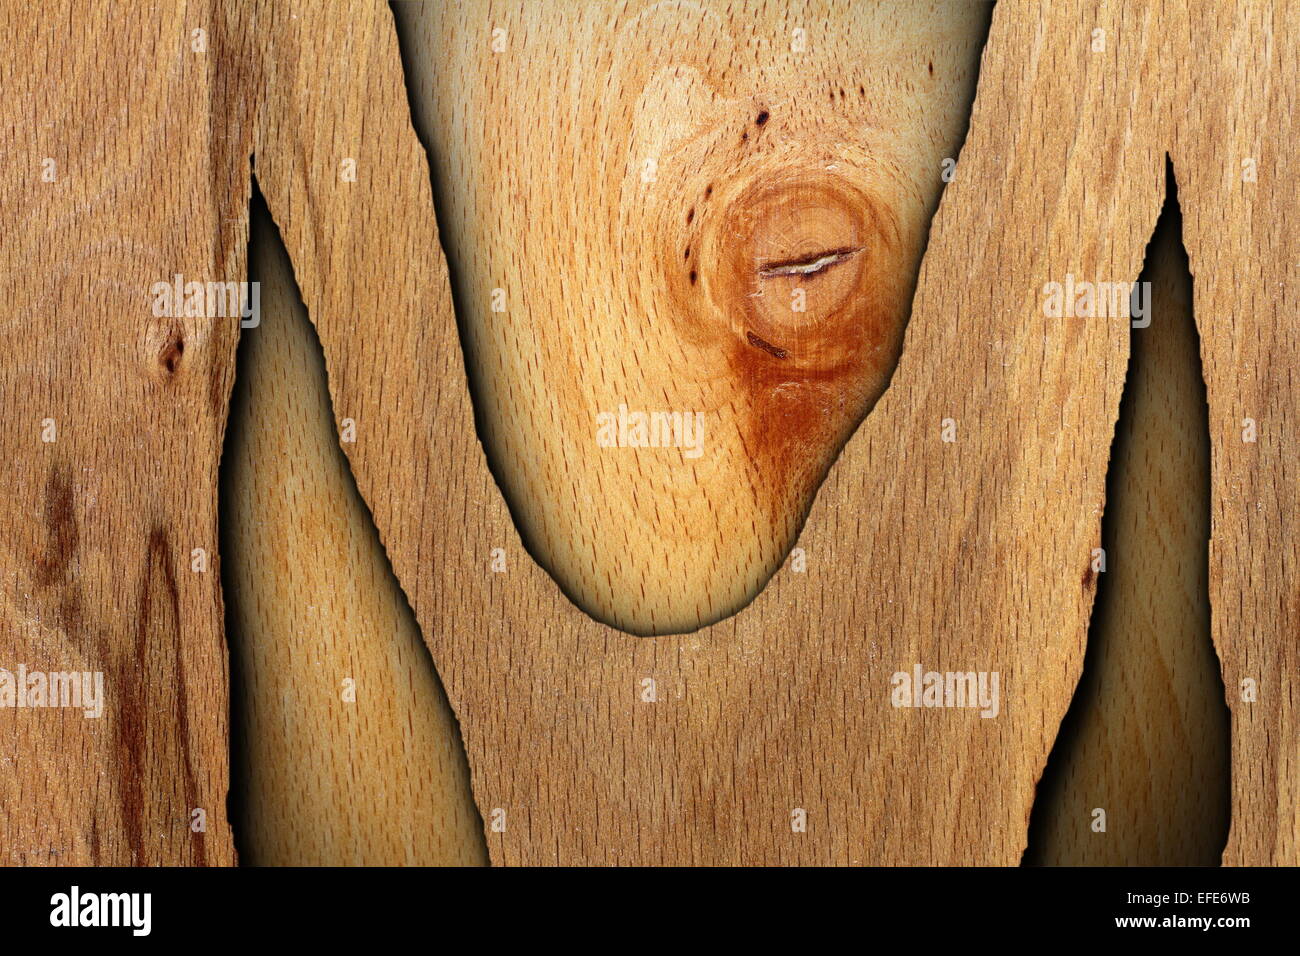 interesting abstract wooden textures cracked plywood Stock Photo